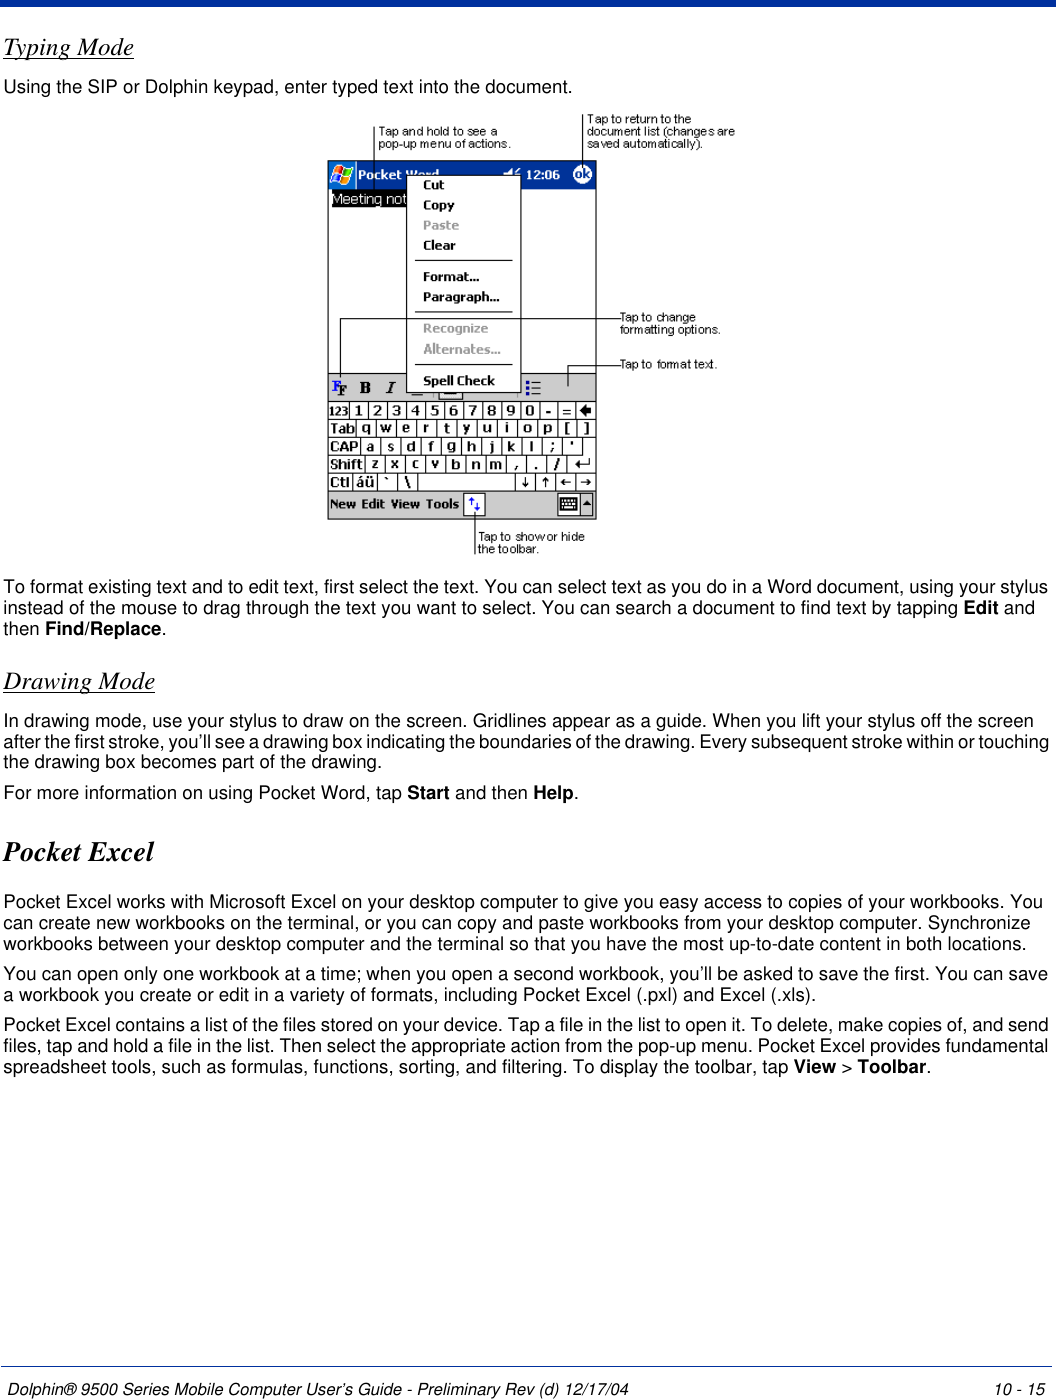 Dolphin® 9500 Series Mobile Computer User’s Guide - Preliminary Rev (d) 12/17/04 10 - 15Typing ModeUsing the SIP or Dolphin keypad, enter typed text into the document. To format existing text and to edit text, first select the text. You can select text as you do in a Word document, using your stylus instead of the mouse to drag through the text you want to select. You can search a document to find text by tapping Edit and then Find/Replace.Drawing ModeIn drawing mode, use your stylus to draw on the screen. Gridlines appear as a guide. When you lift your stylus off the screen after the first stroke, you’ll see a drawing box indicating the boundaries of the drawing. Every subsequent stroke within or touching the drawing box becomes part of the drawing. For more information on using Pocket Word, tap Start and then Help.Pocket ExcelPocket Excel works with Microsoft Excel on your desktop computer to give you easy access to copies of your workbooks. You can create new workbooks on the terminal, or you can copy and paste workbooks from your desktop computer. Synchronize workbooks between your desktop computer and the terminal so that you have the most up-to-date content in both locations.You can open only one workbook at a time; when you open a second workbook, you’ll be asked to save the first. You can save a workbook you create or edit in a variety of formats, including Pocket Excel (.pxl) and Excel (.xls).Pocket Excel contains a list of the files stored on your device. Tap a file in the list to open it. To delete, make copies of, and send files, tap and hold a file in the list. Then select the appropriate action from the pop-up menu. Pocket Excel provides fundamental spreadsheet tools, such as formulas, functions, sorting, and filtering. To display the toolbar, tap View &gt; Toolbar.